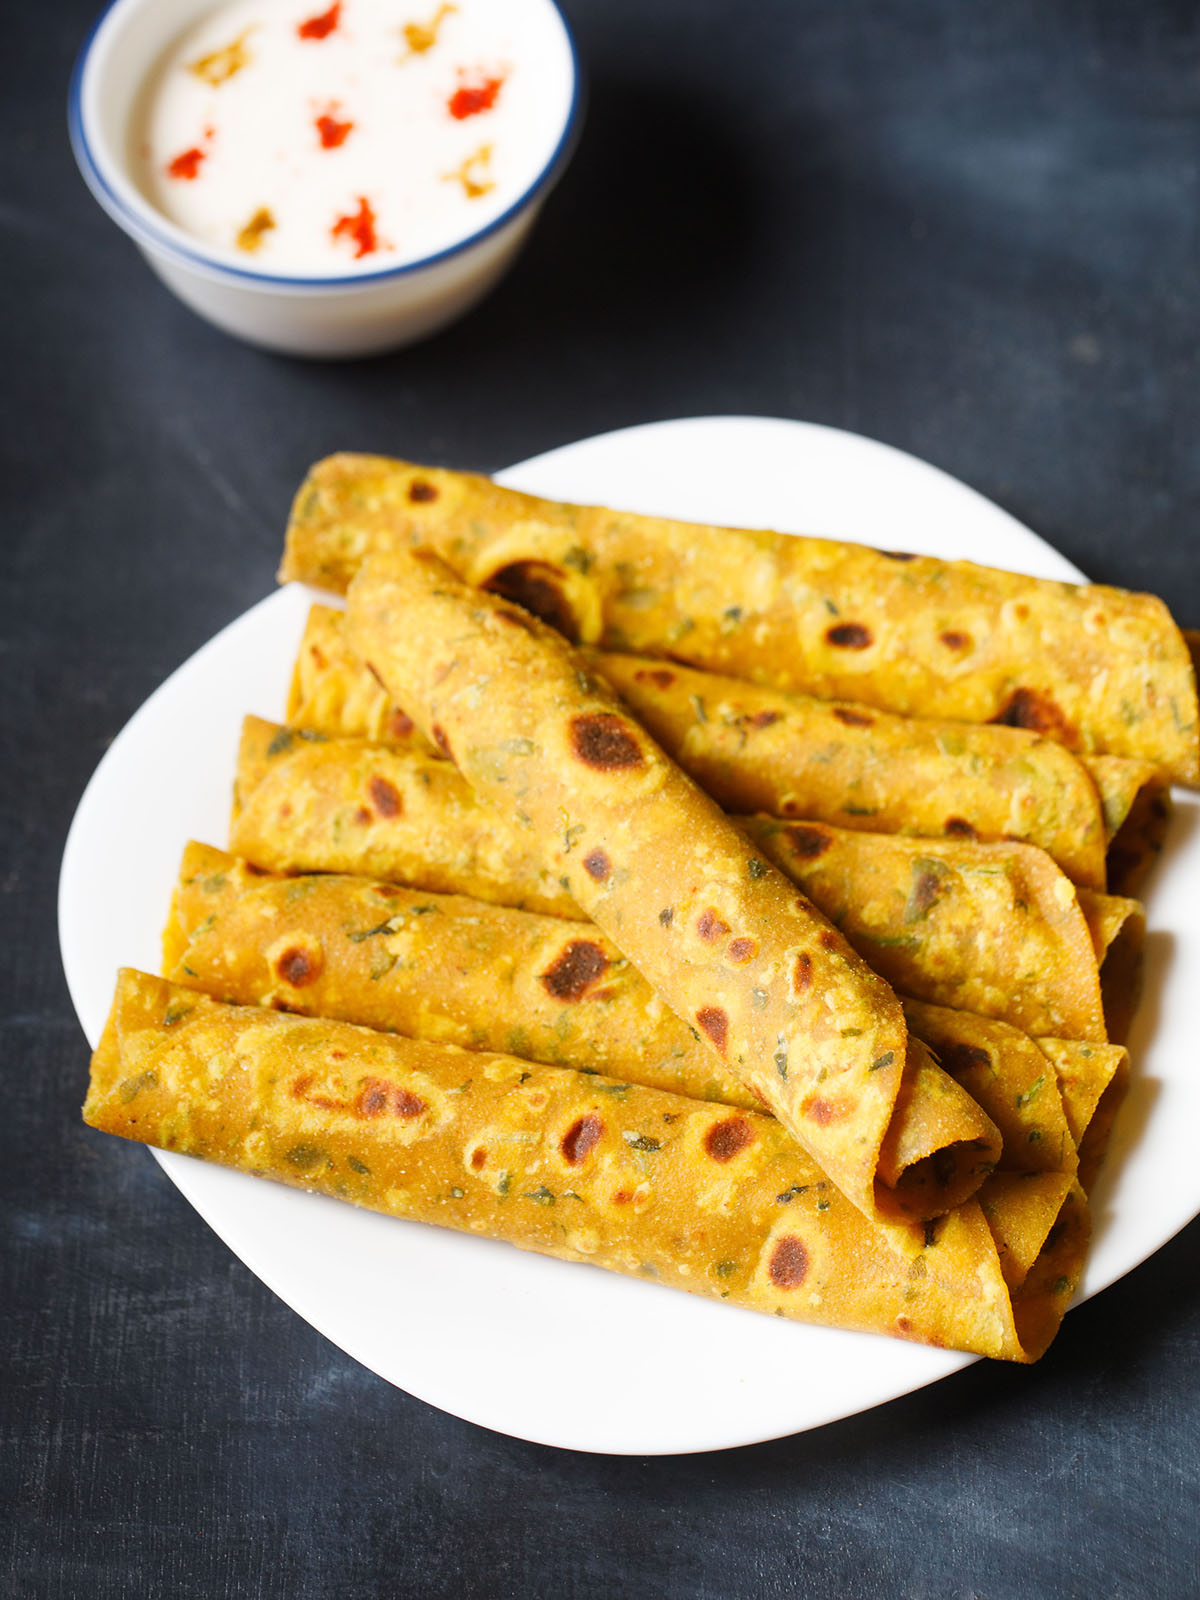 Thepla is one of the famous dishes of Gujarat